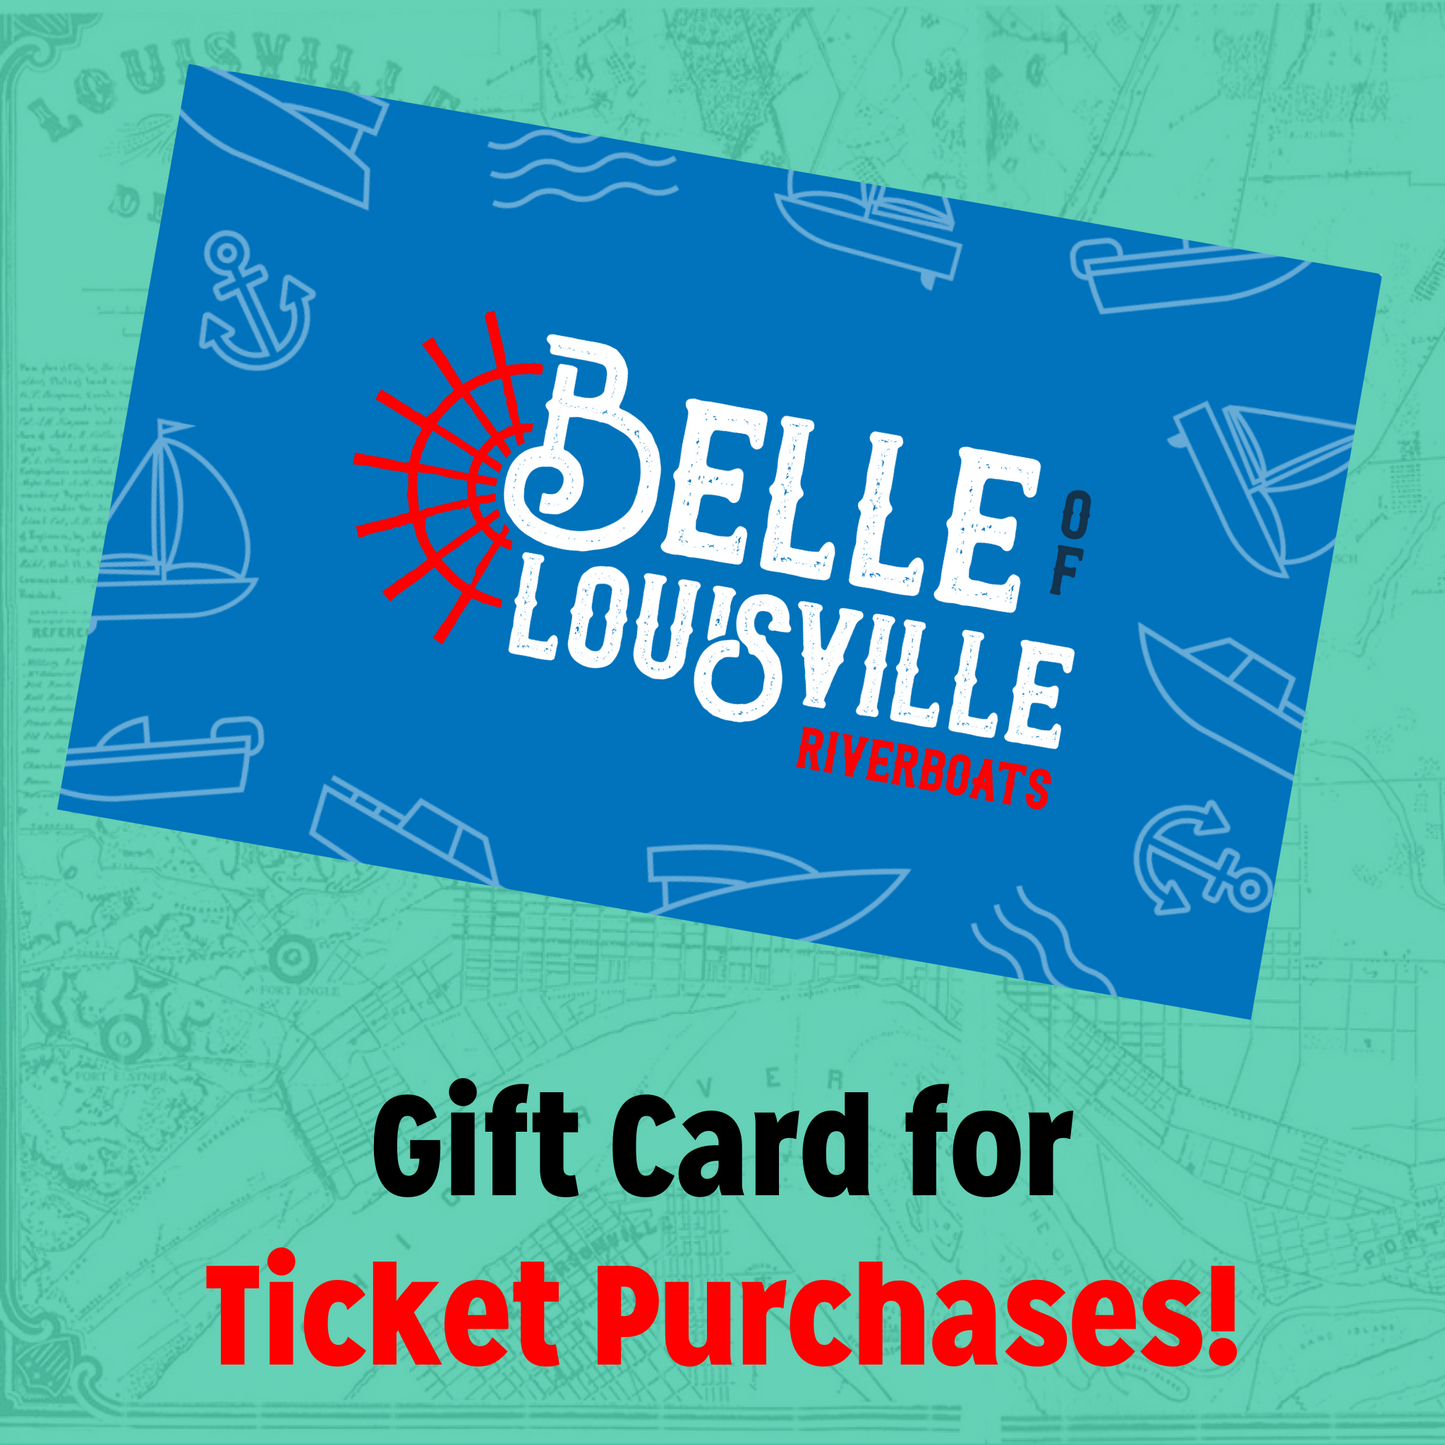 Belle of Louisville Riverboats Ticket Gift Card